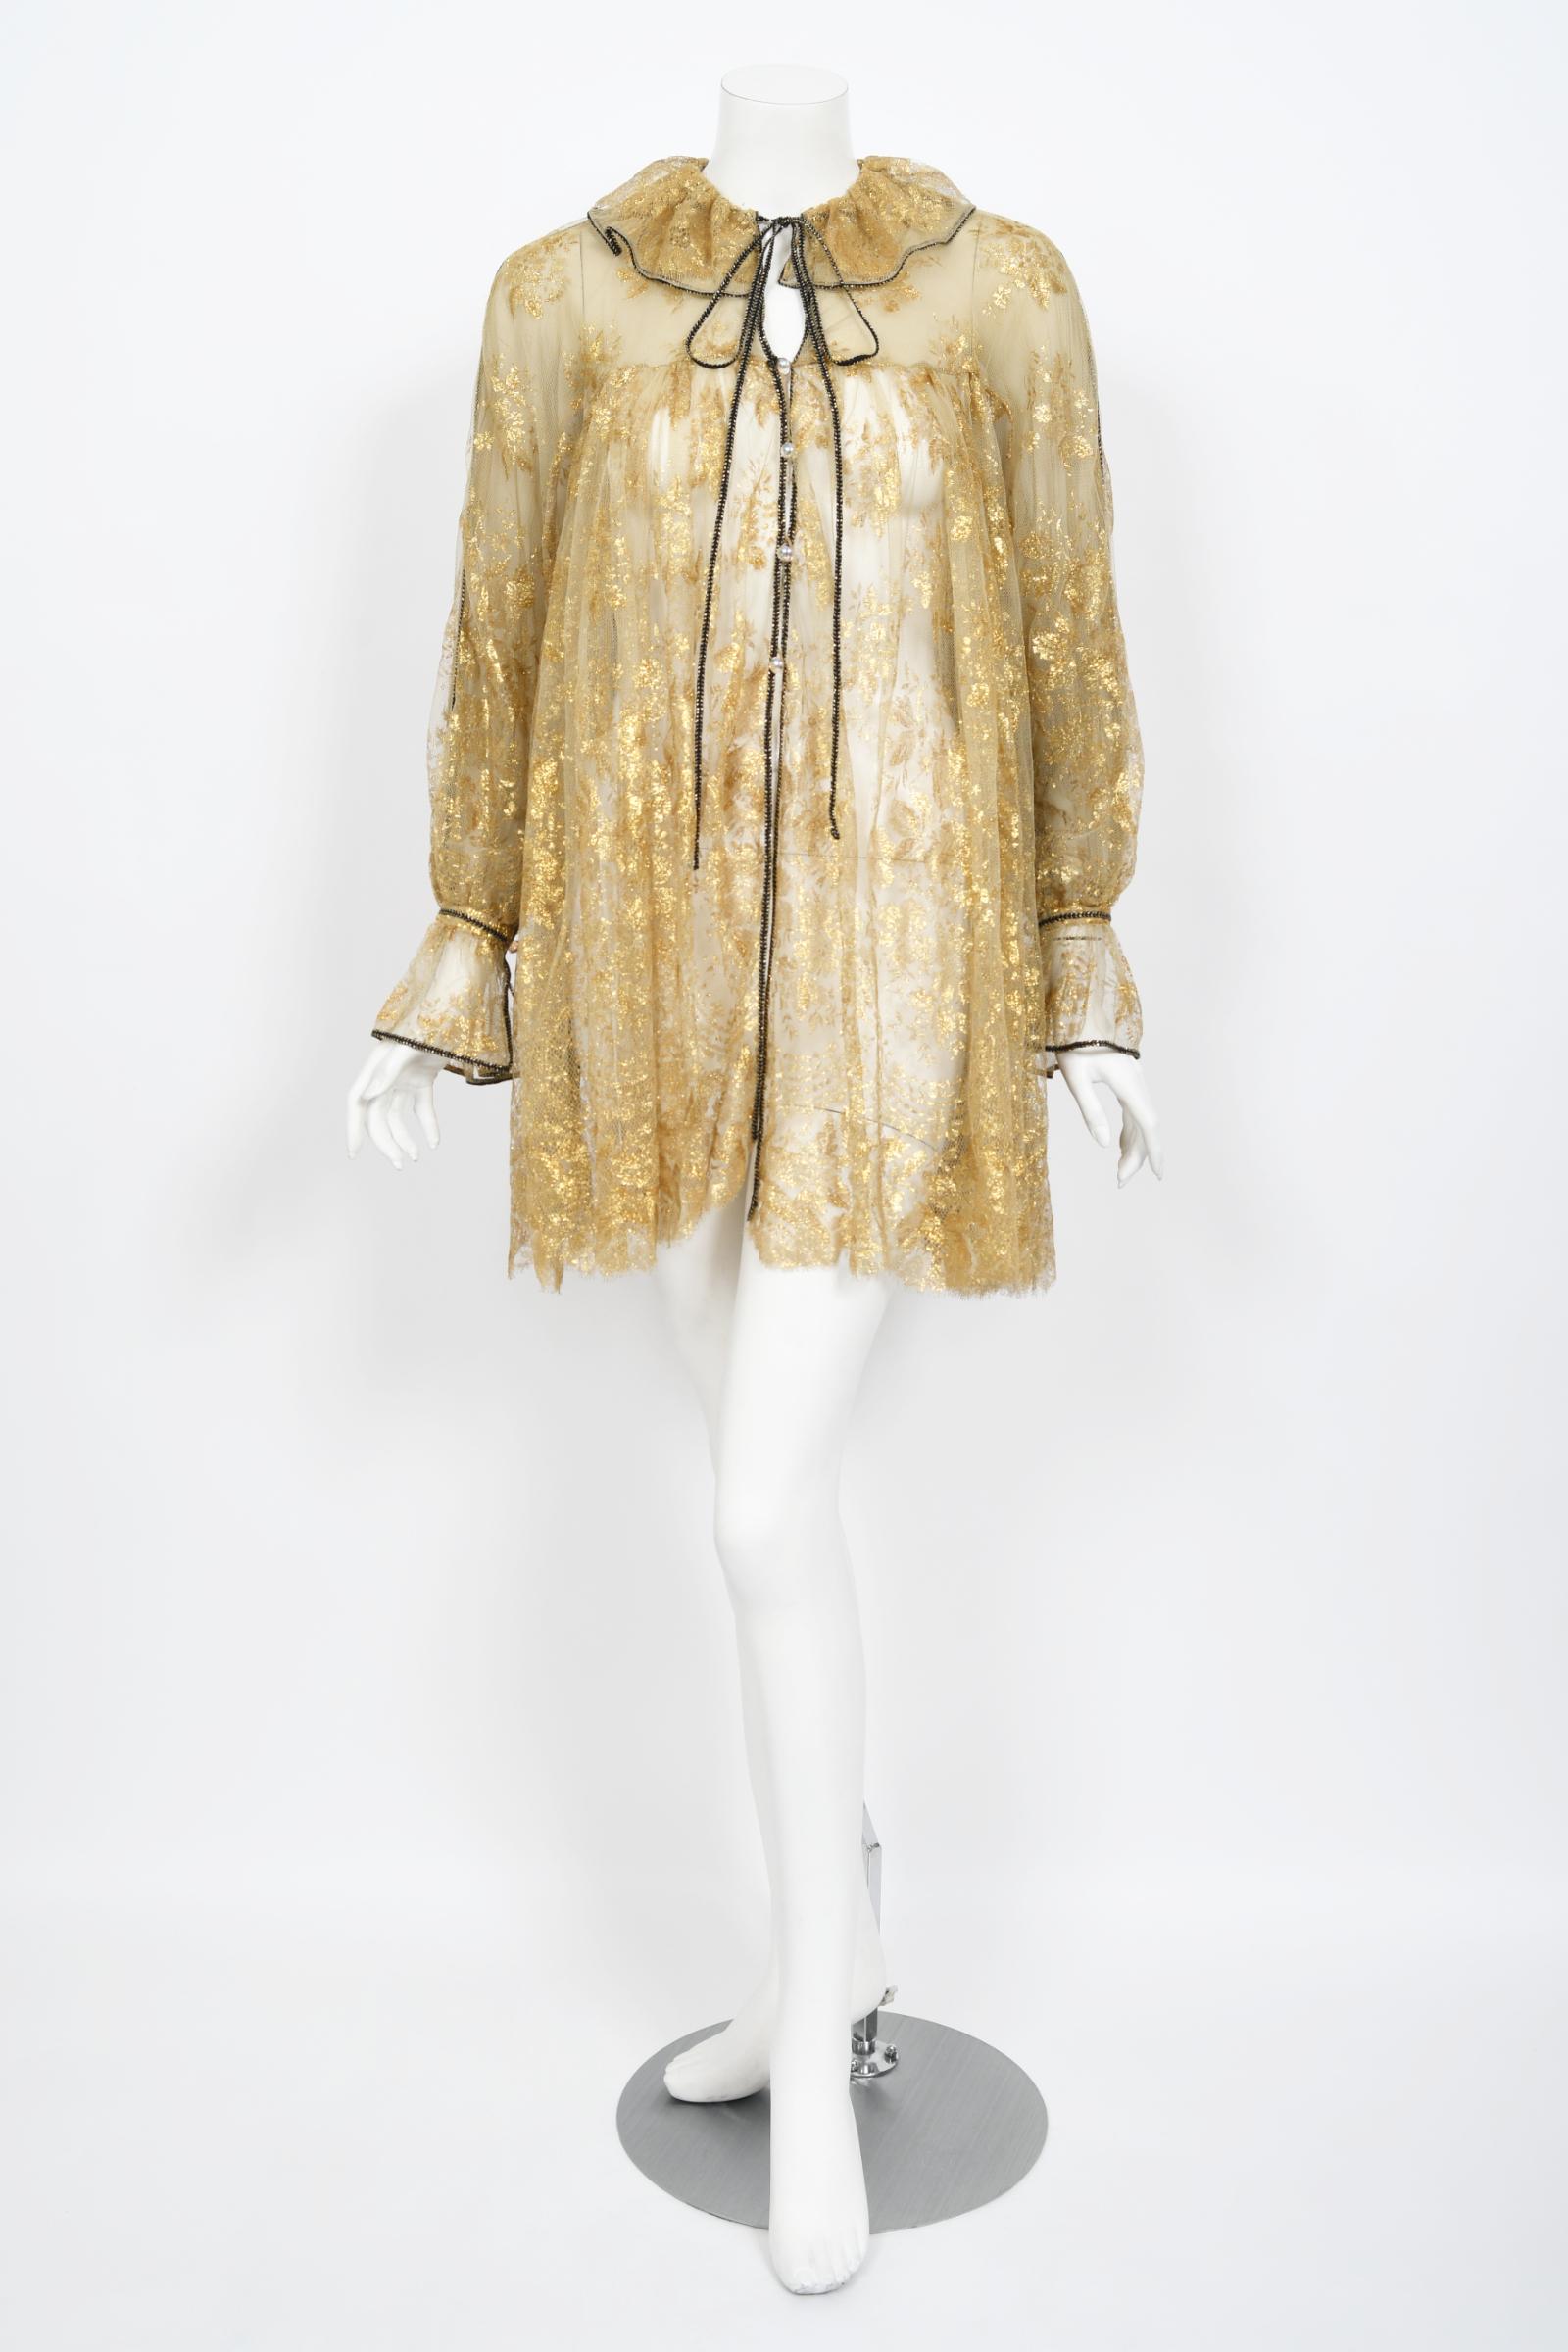 A truly magical and ultra rare Bill Gibb of London couture metallic gold lace tunic babydoll dress dating back to his 1978 fall-winter collection. His pieces are very collectible and found in museum's around the globe. As shown, a very similar